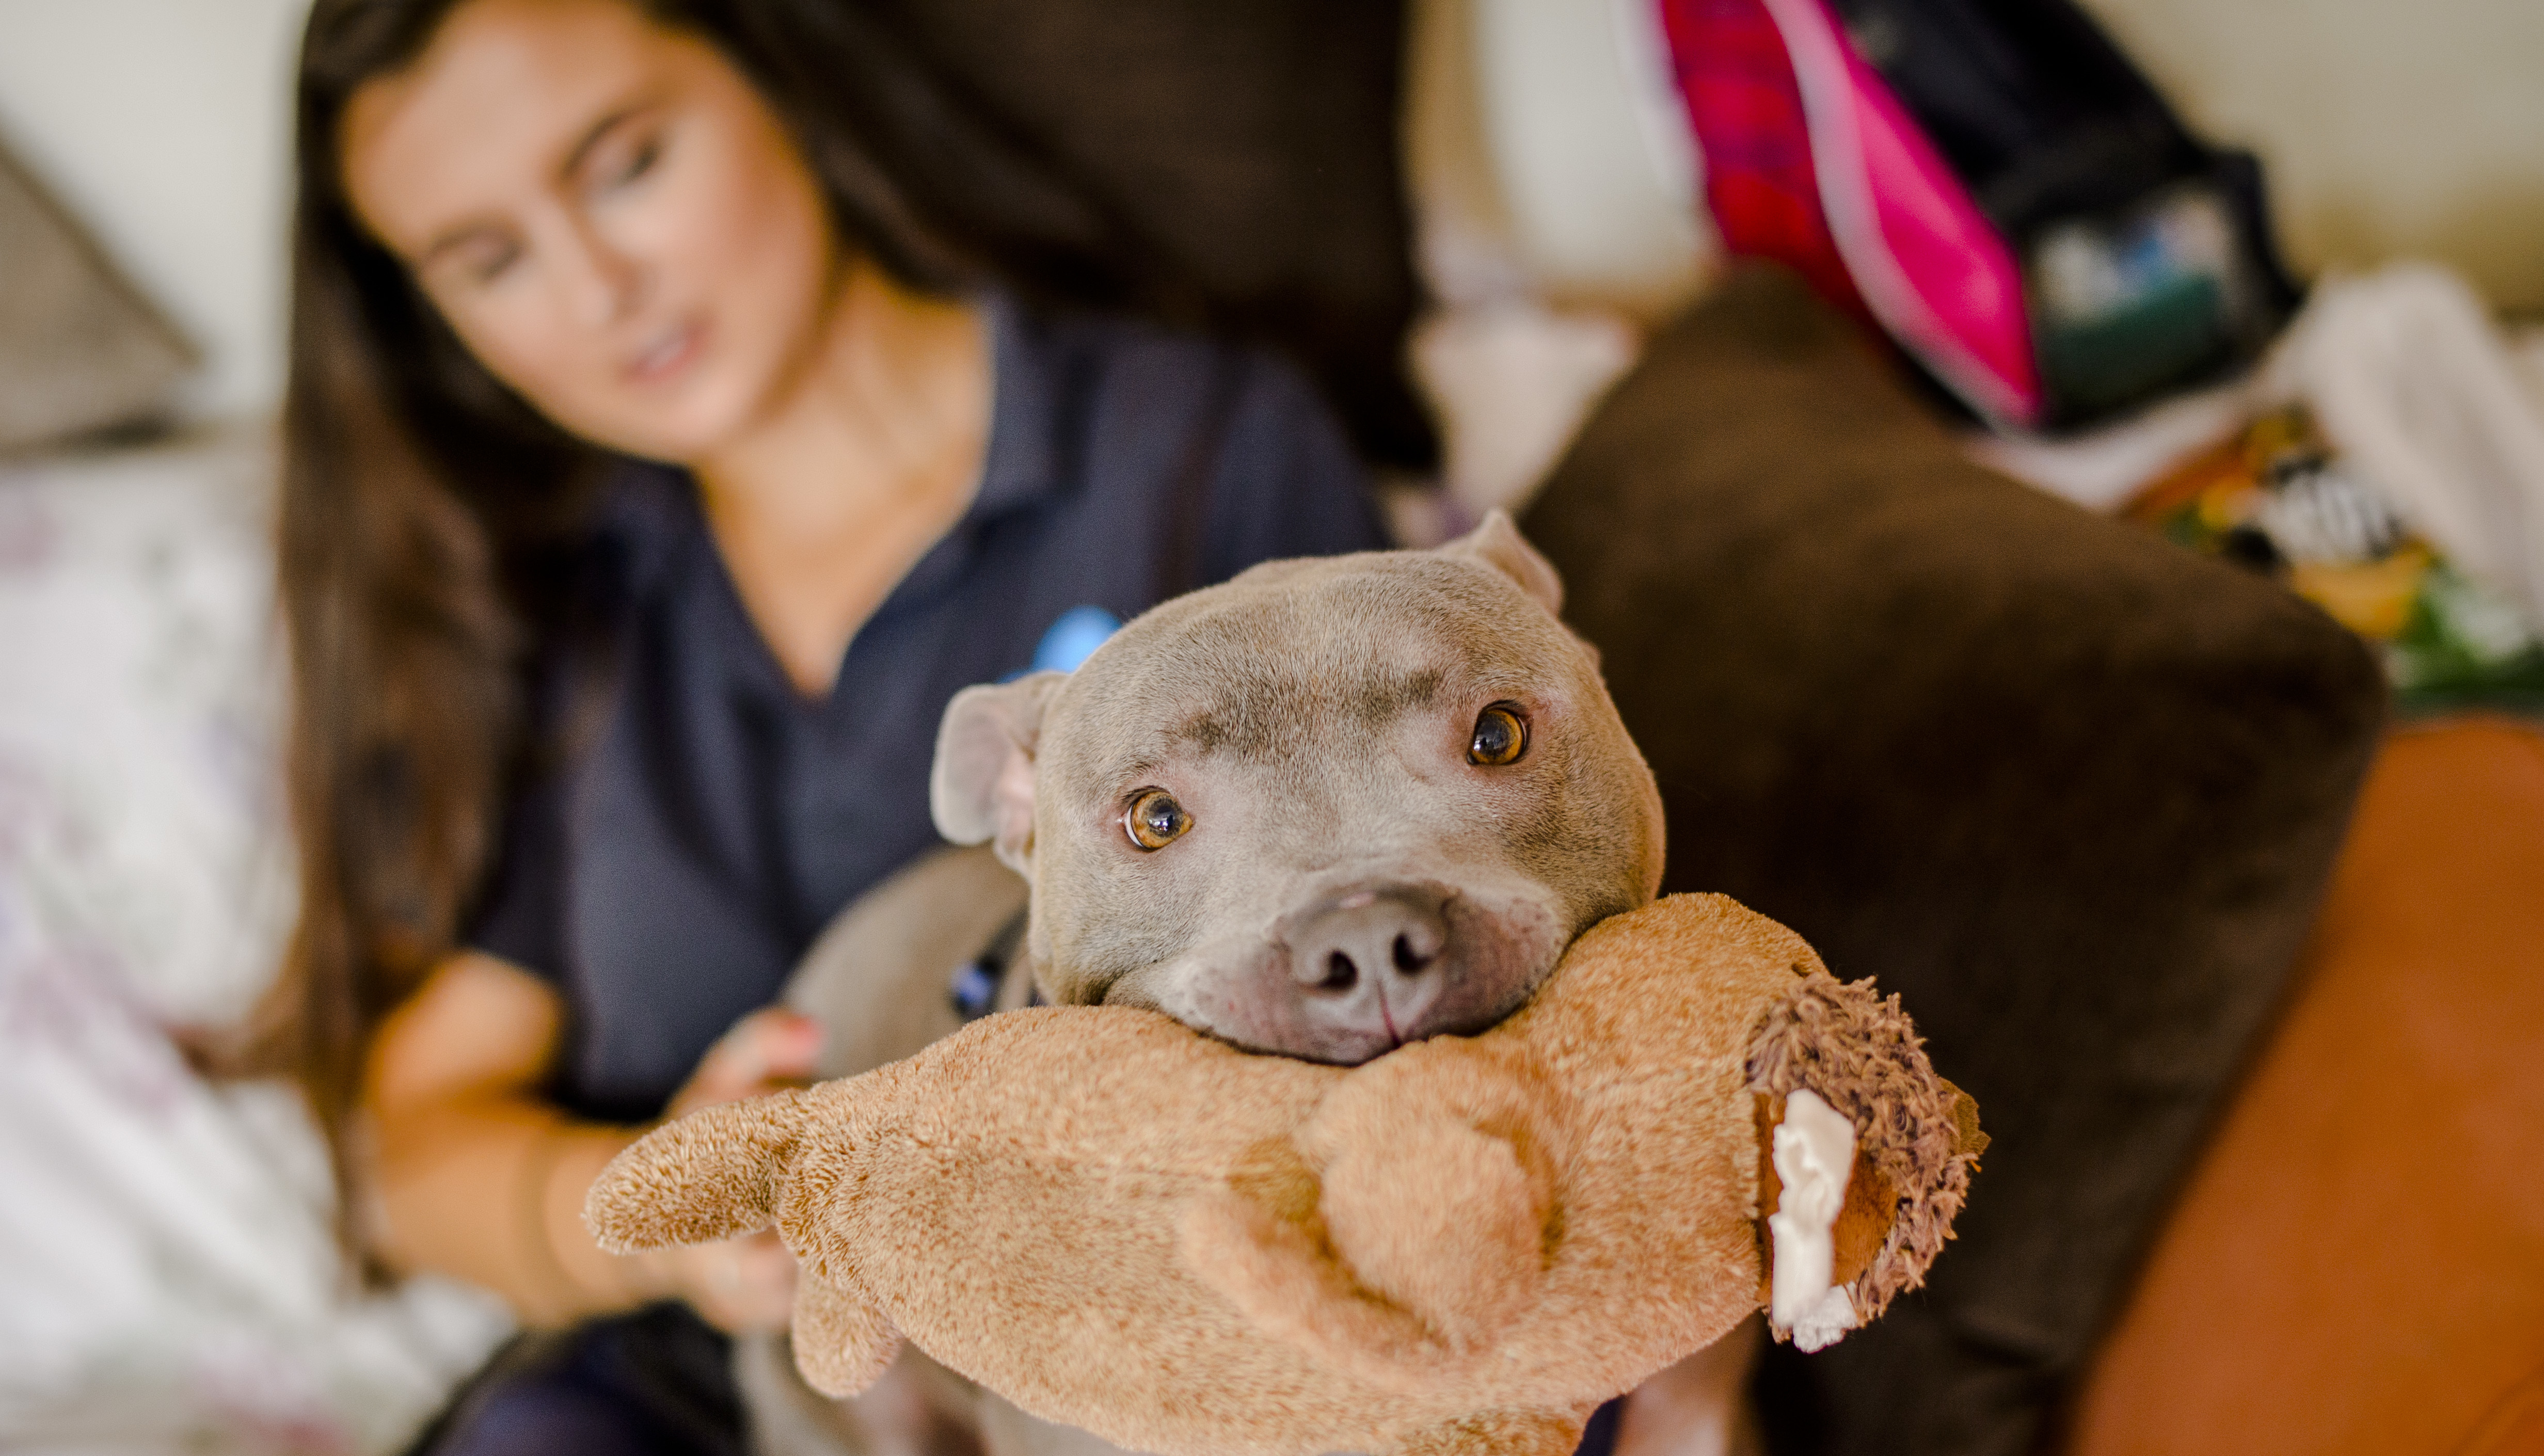 Salty the staffie has a cuddly toy in his chops